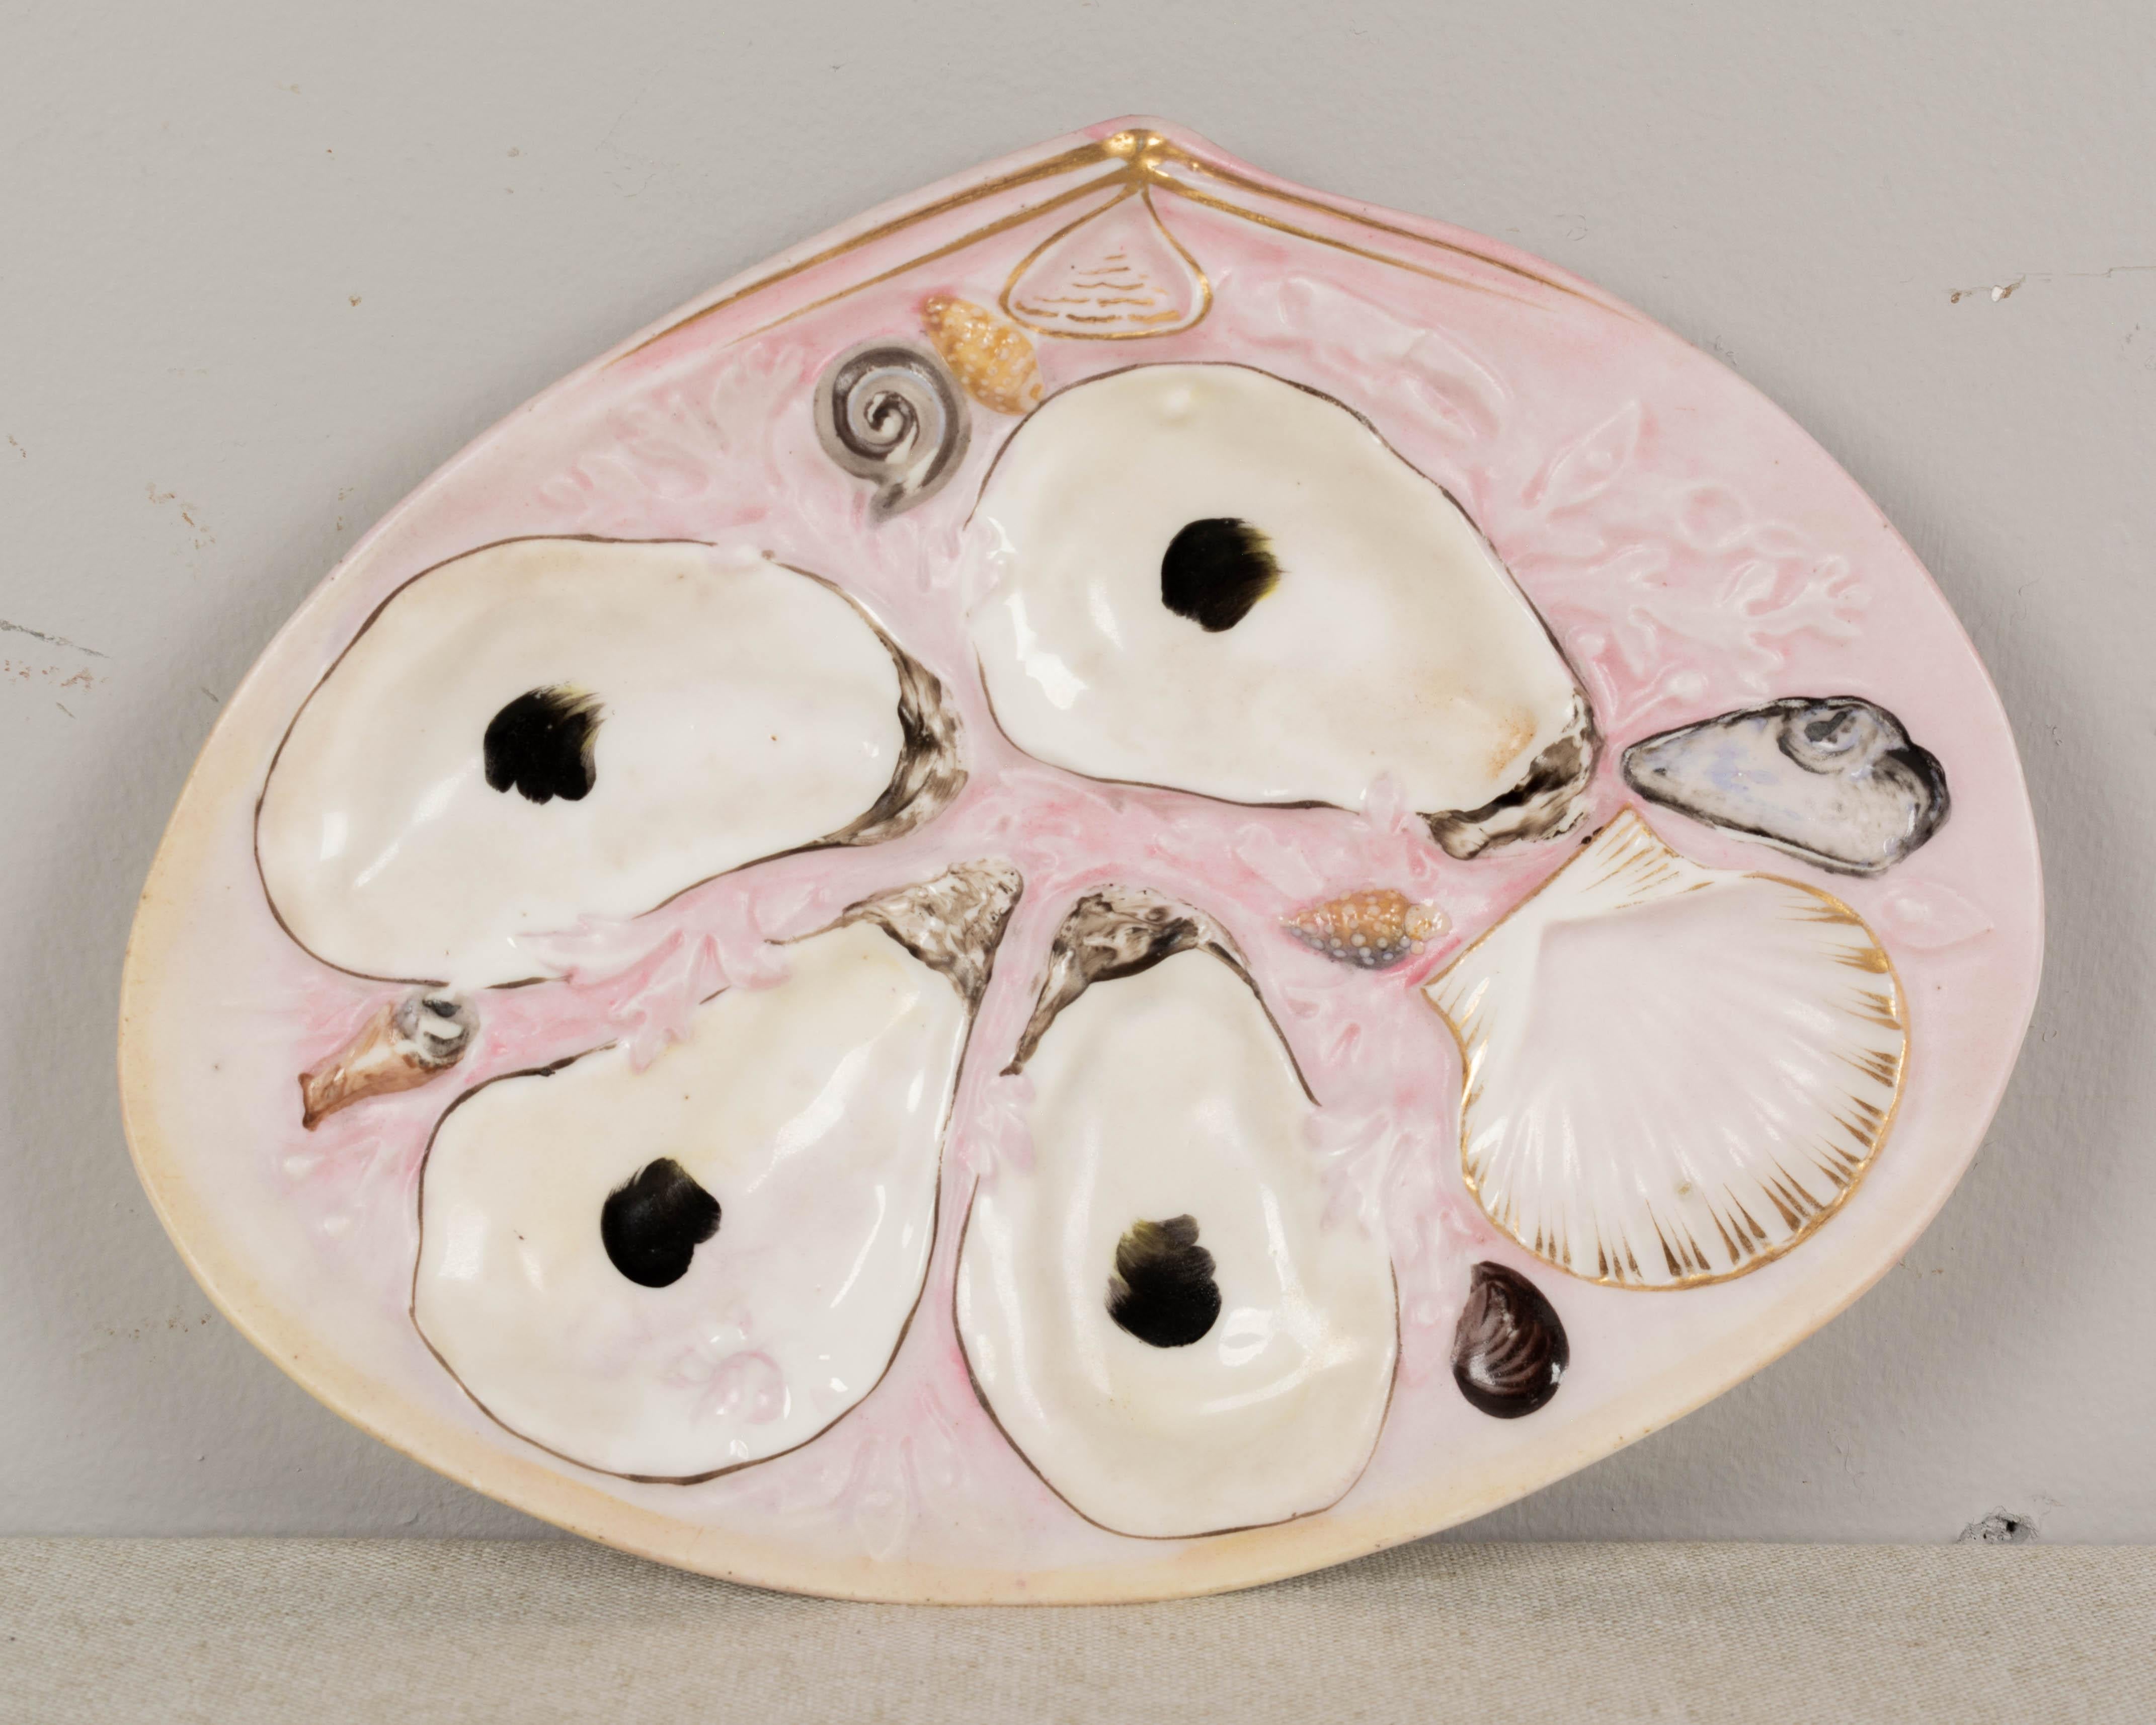 A set of four 19th century oyster plates made by the Union Porcelain Works of Greenpoint, New York. Hand-painted with pale pink ground and gilt accents. Nicely shaped and molded with four shallow wells for oysters and a scallop shell for sauce.